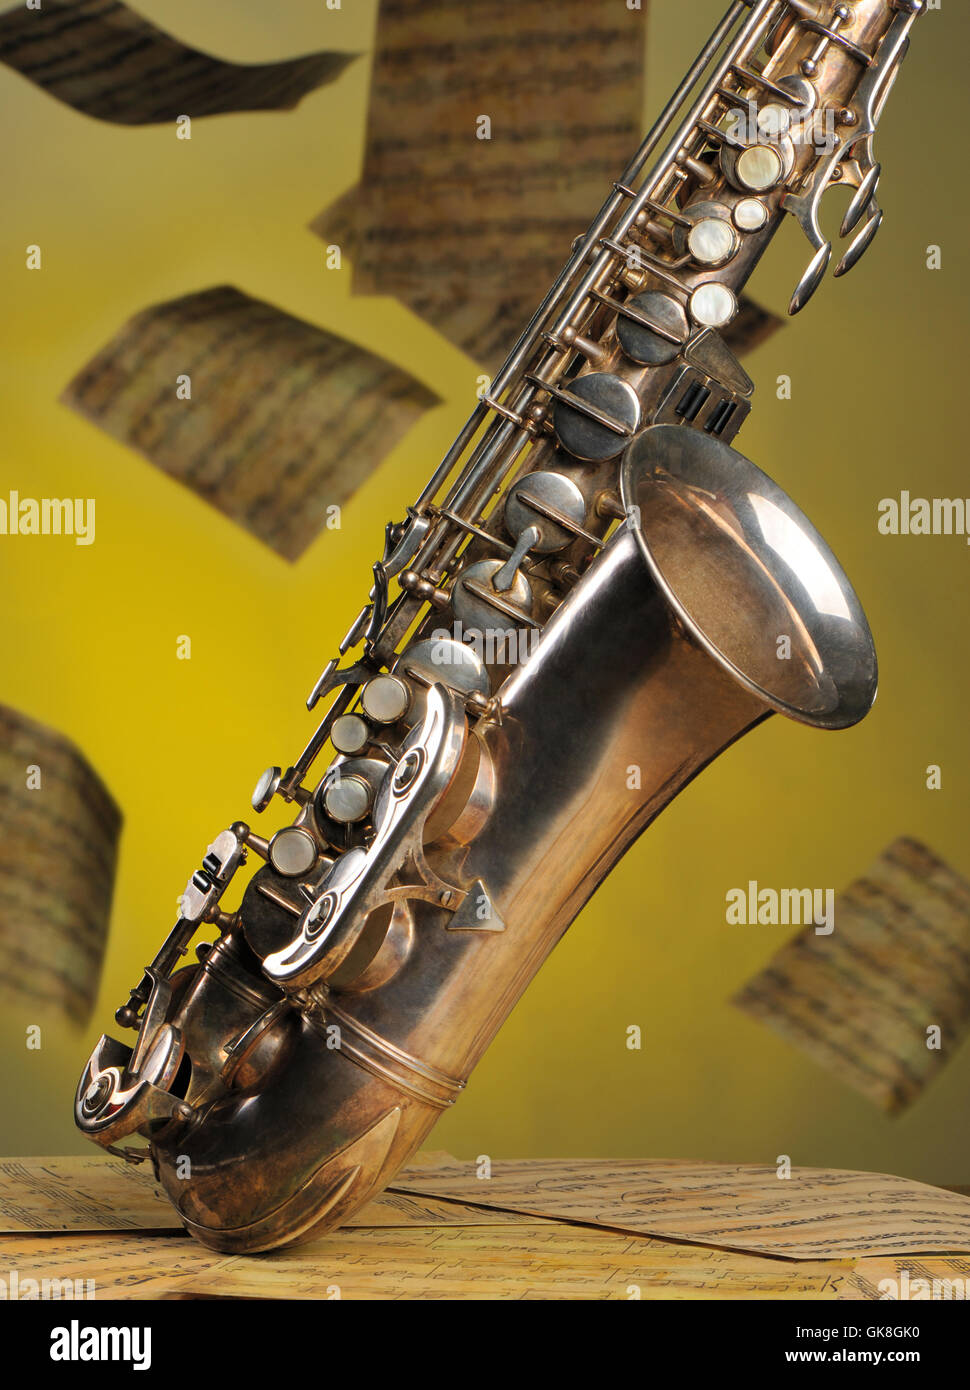 Old saxophone and flying musical notes on a background Stock Photo - Alamy